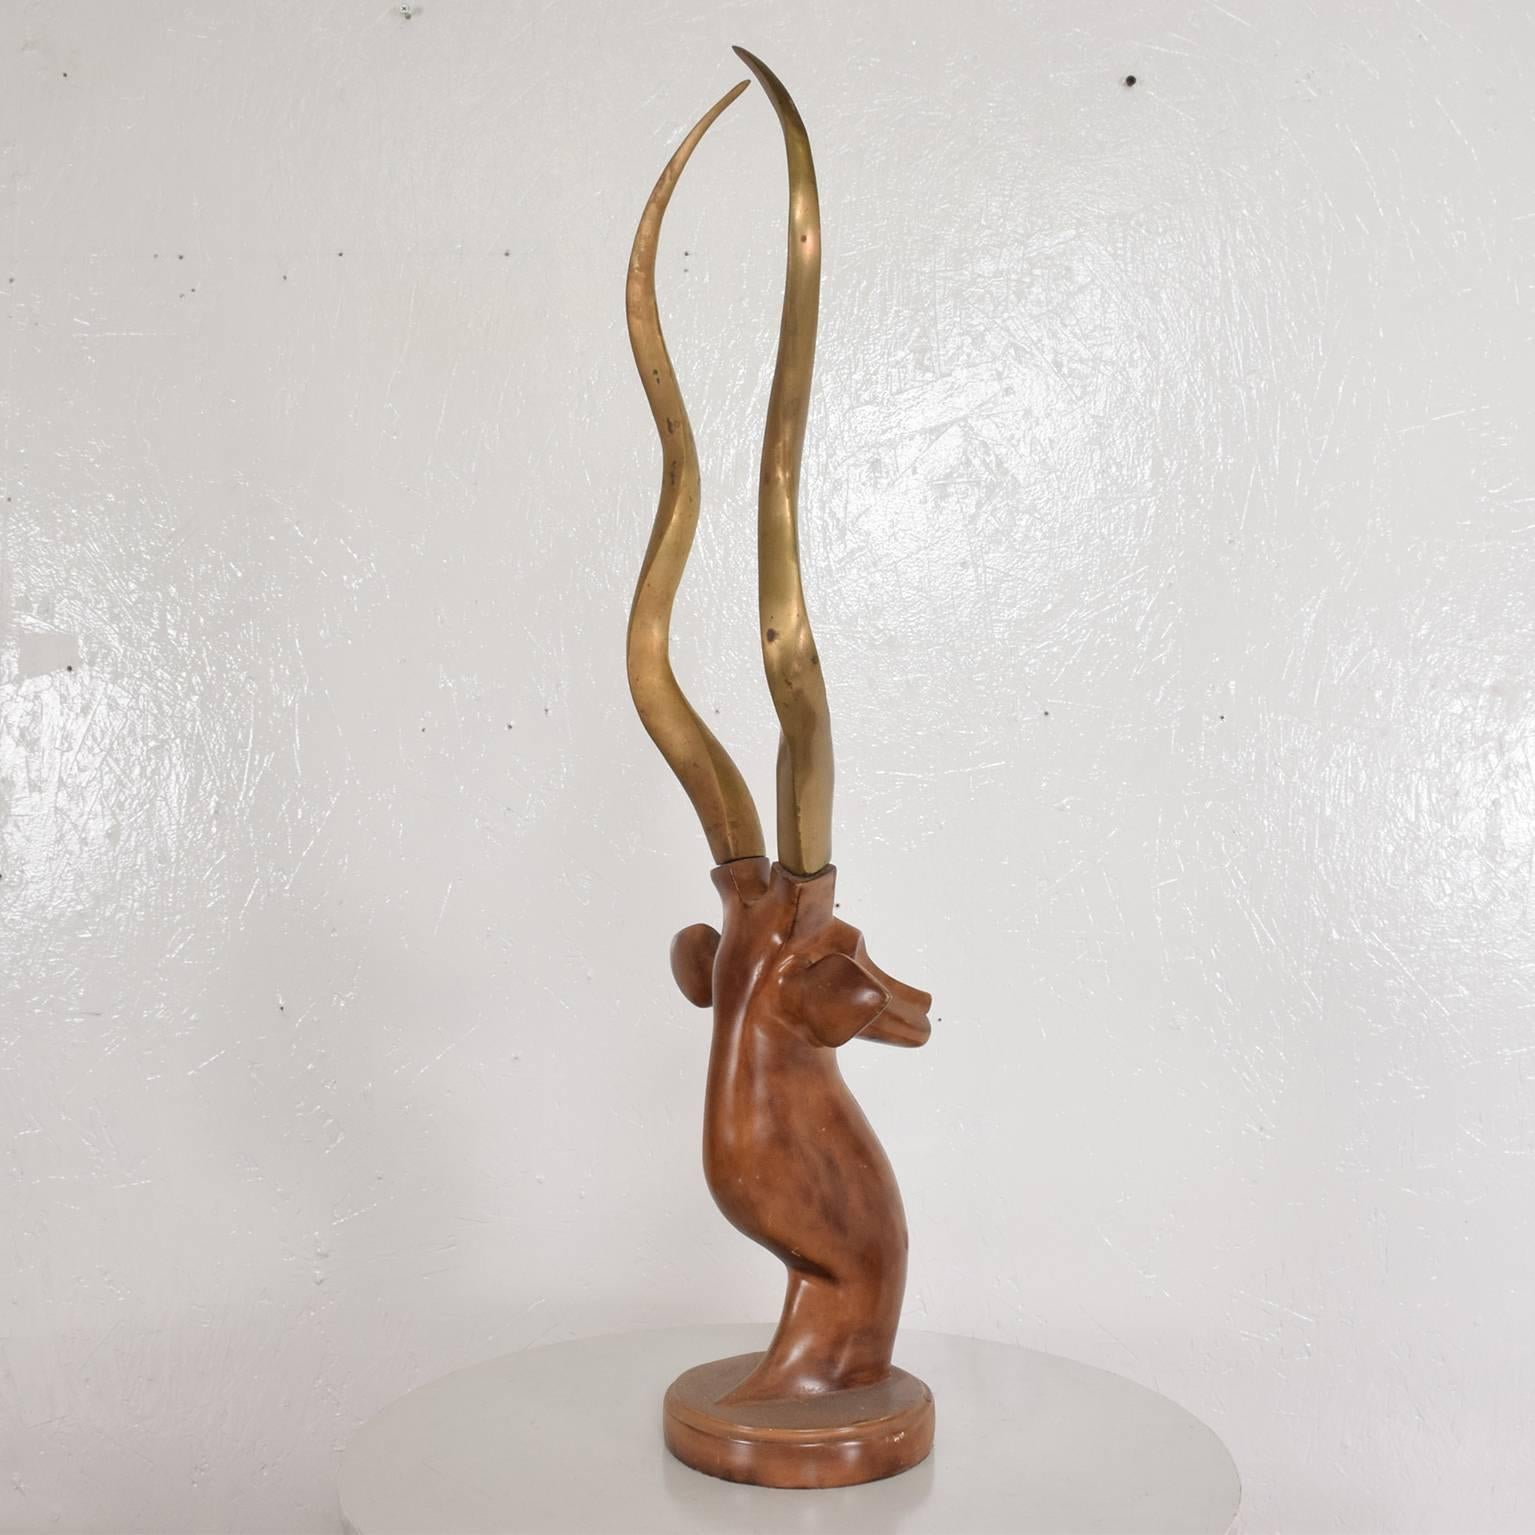 Art Deco Midcentury Style Metal Gazelle with Brass Antlers